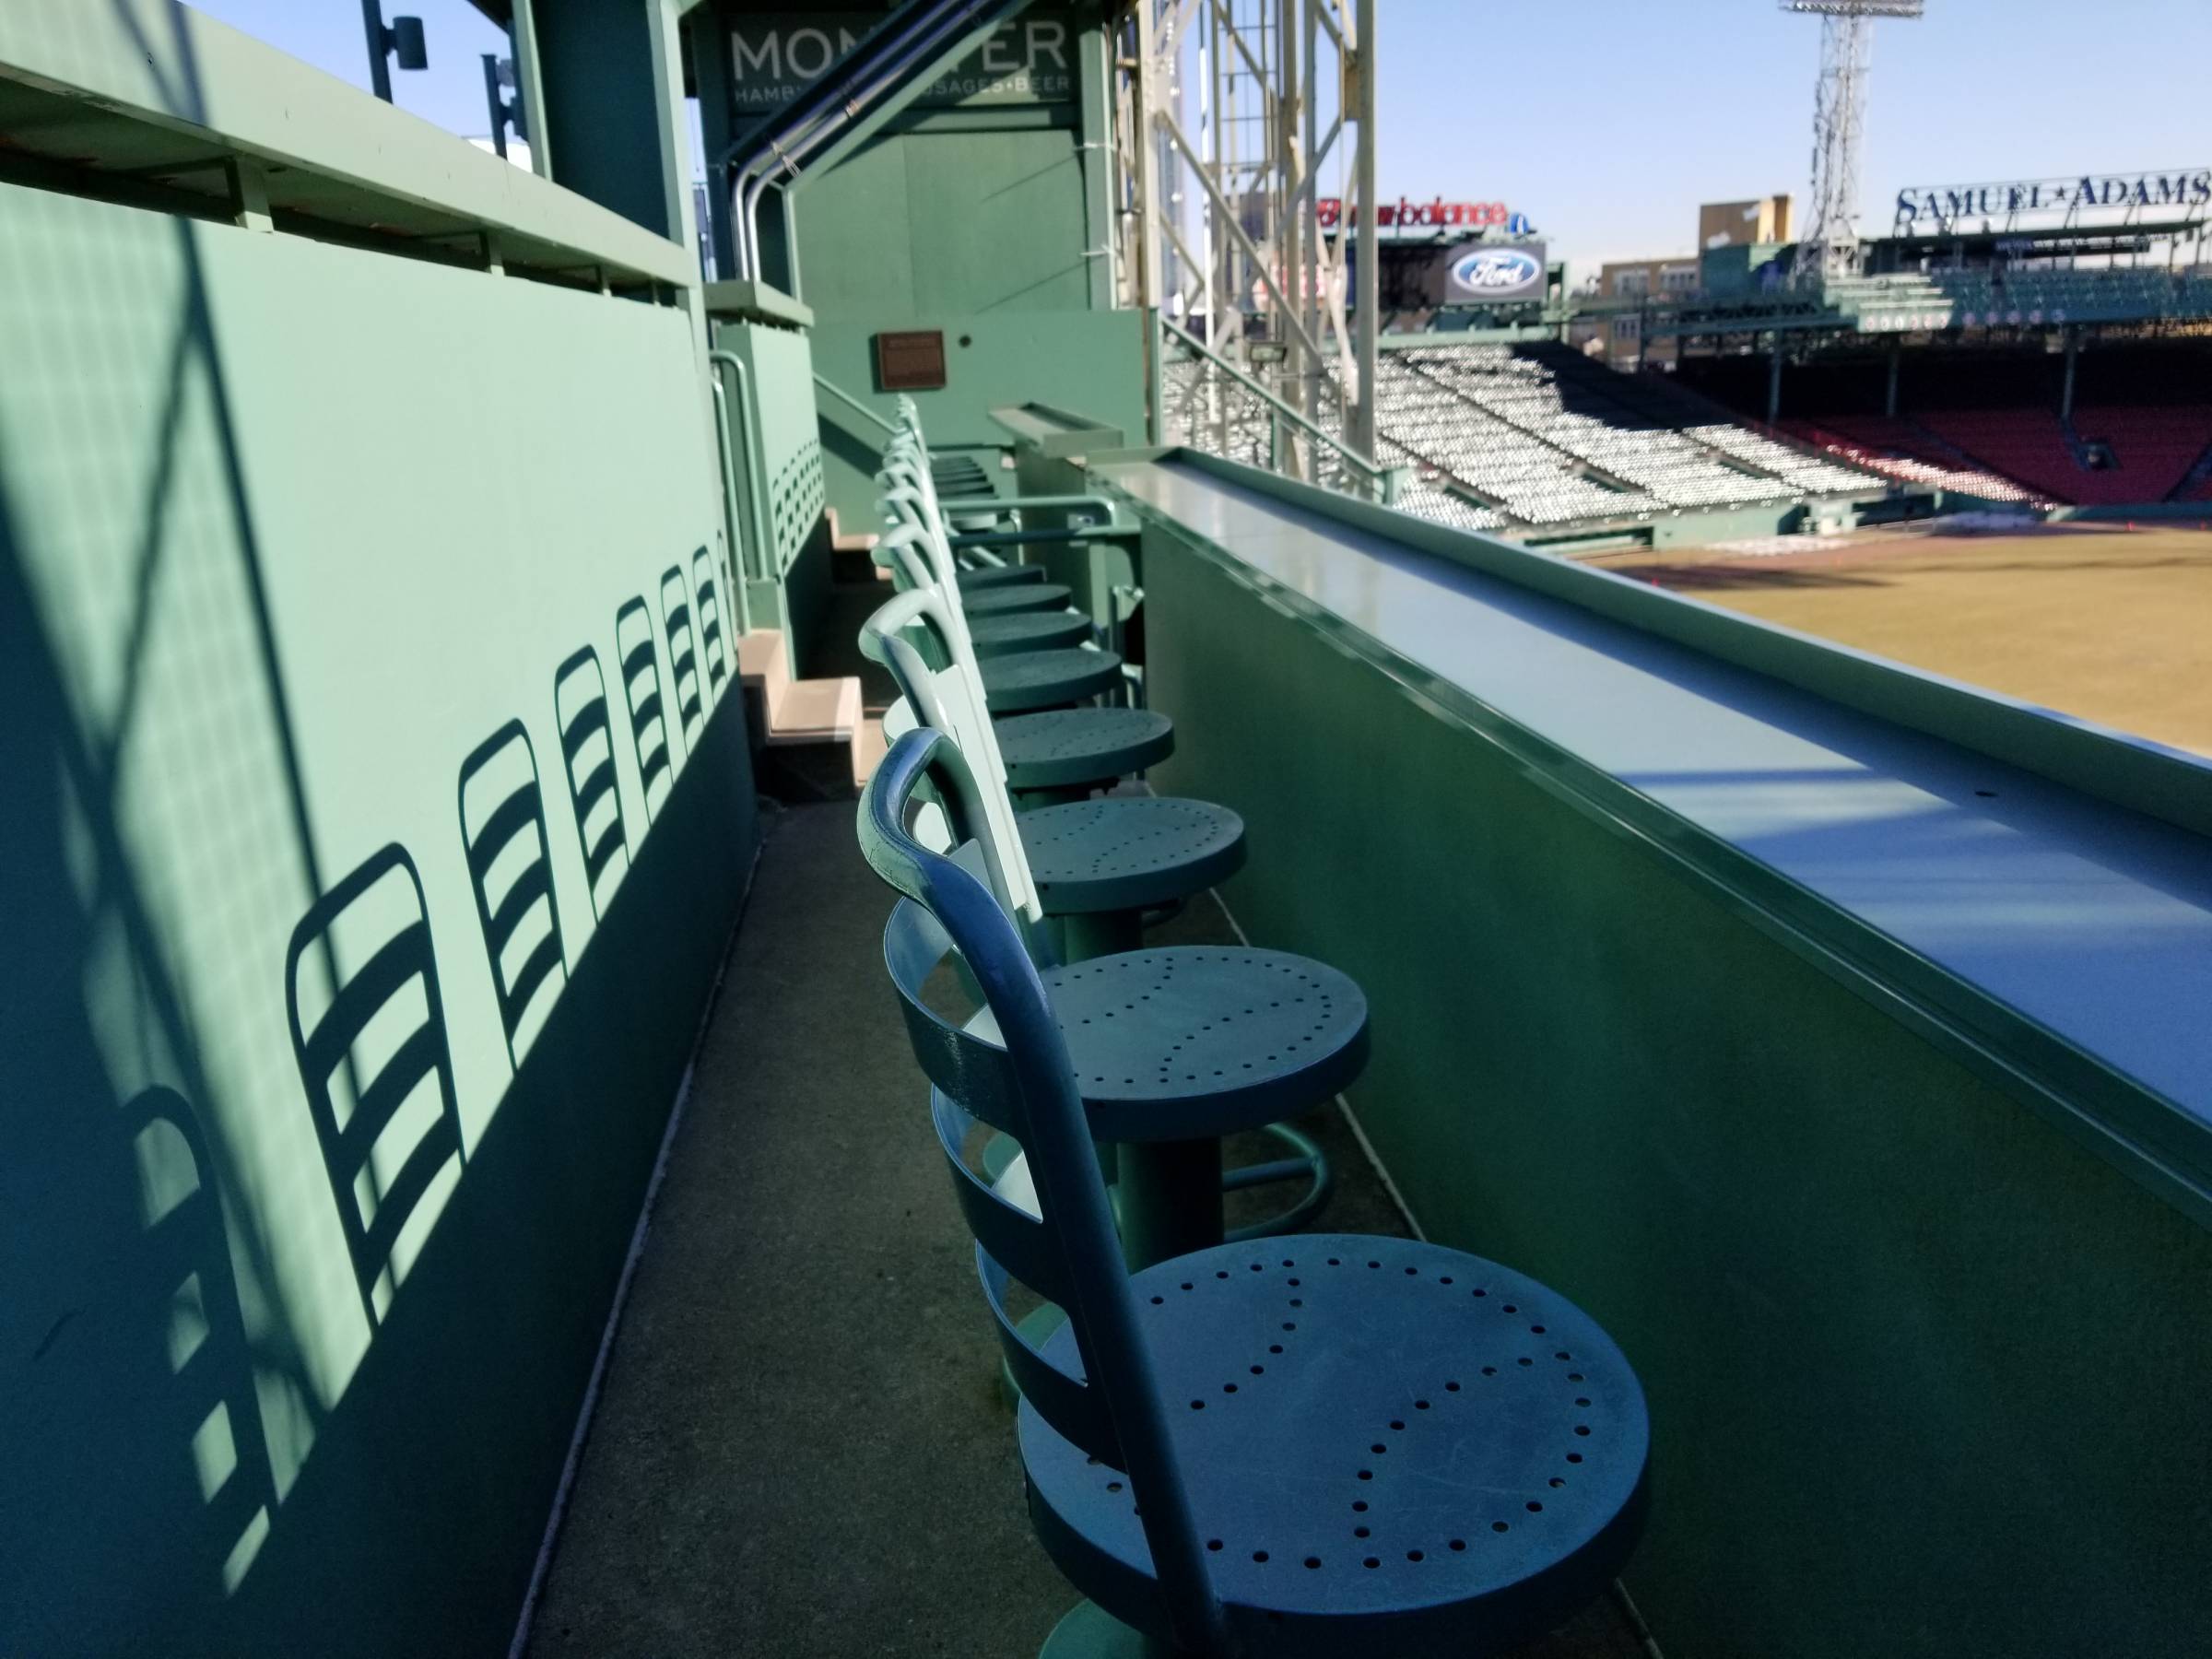 Red Sox Green Monster seats